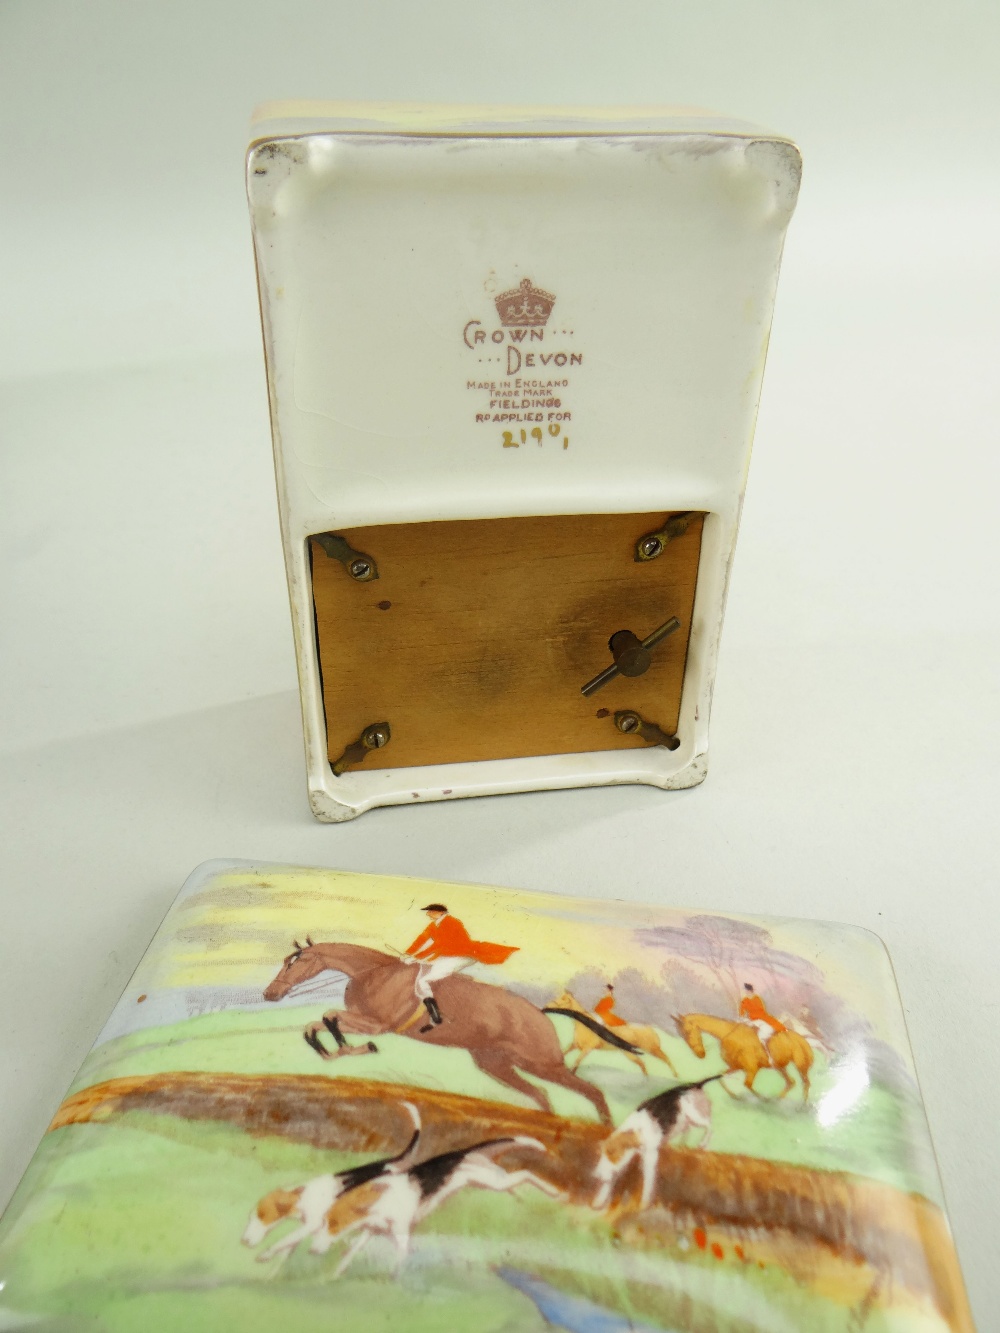 THREE MUSIC BOX COLLECTIBLES, comprising Fieldings Crown Devon Fox Hunting box & cover (music box - Image 3 of 6